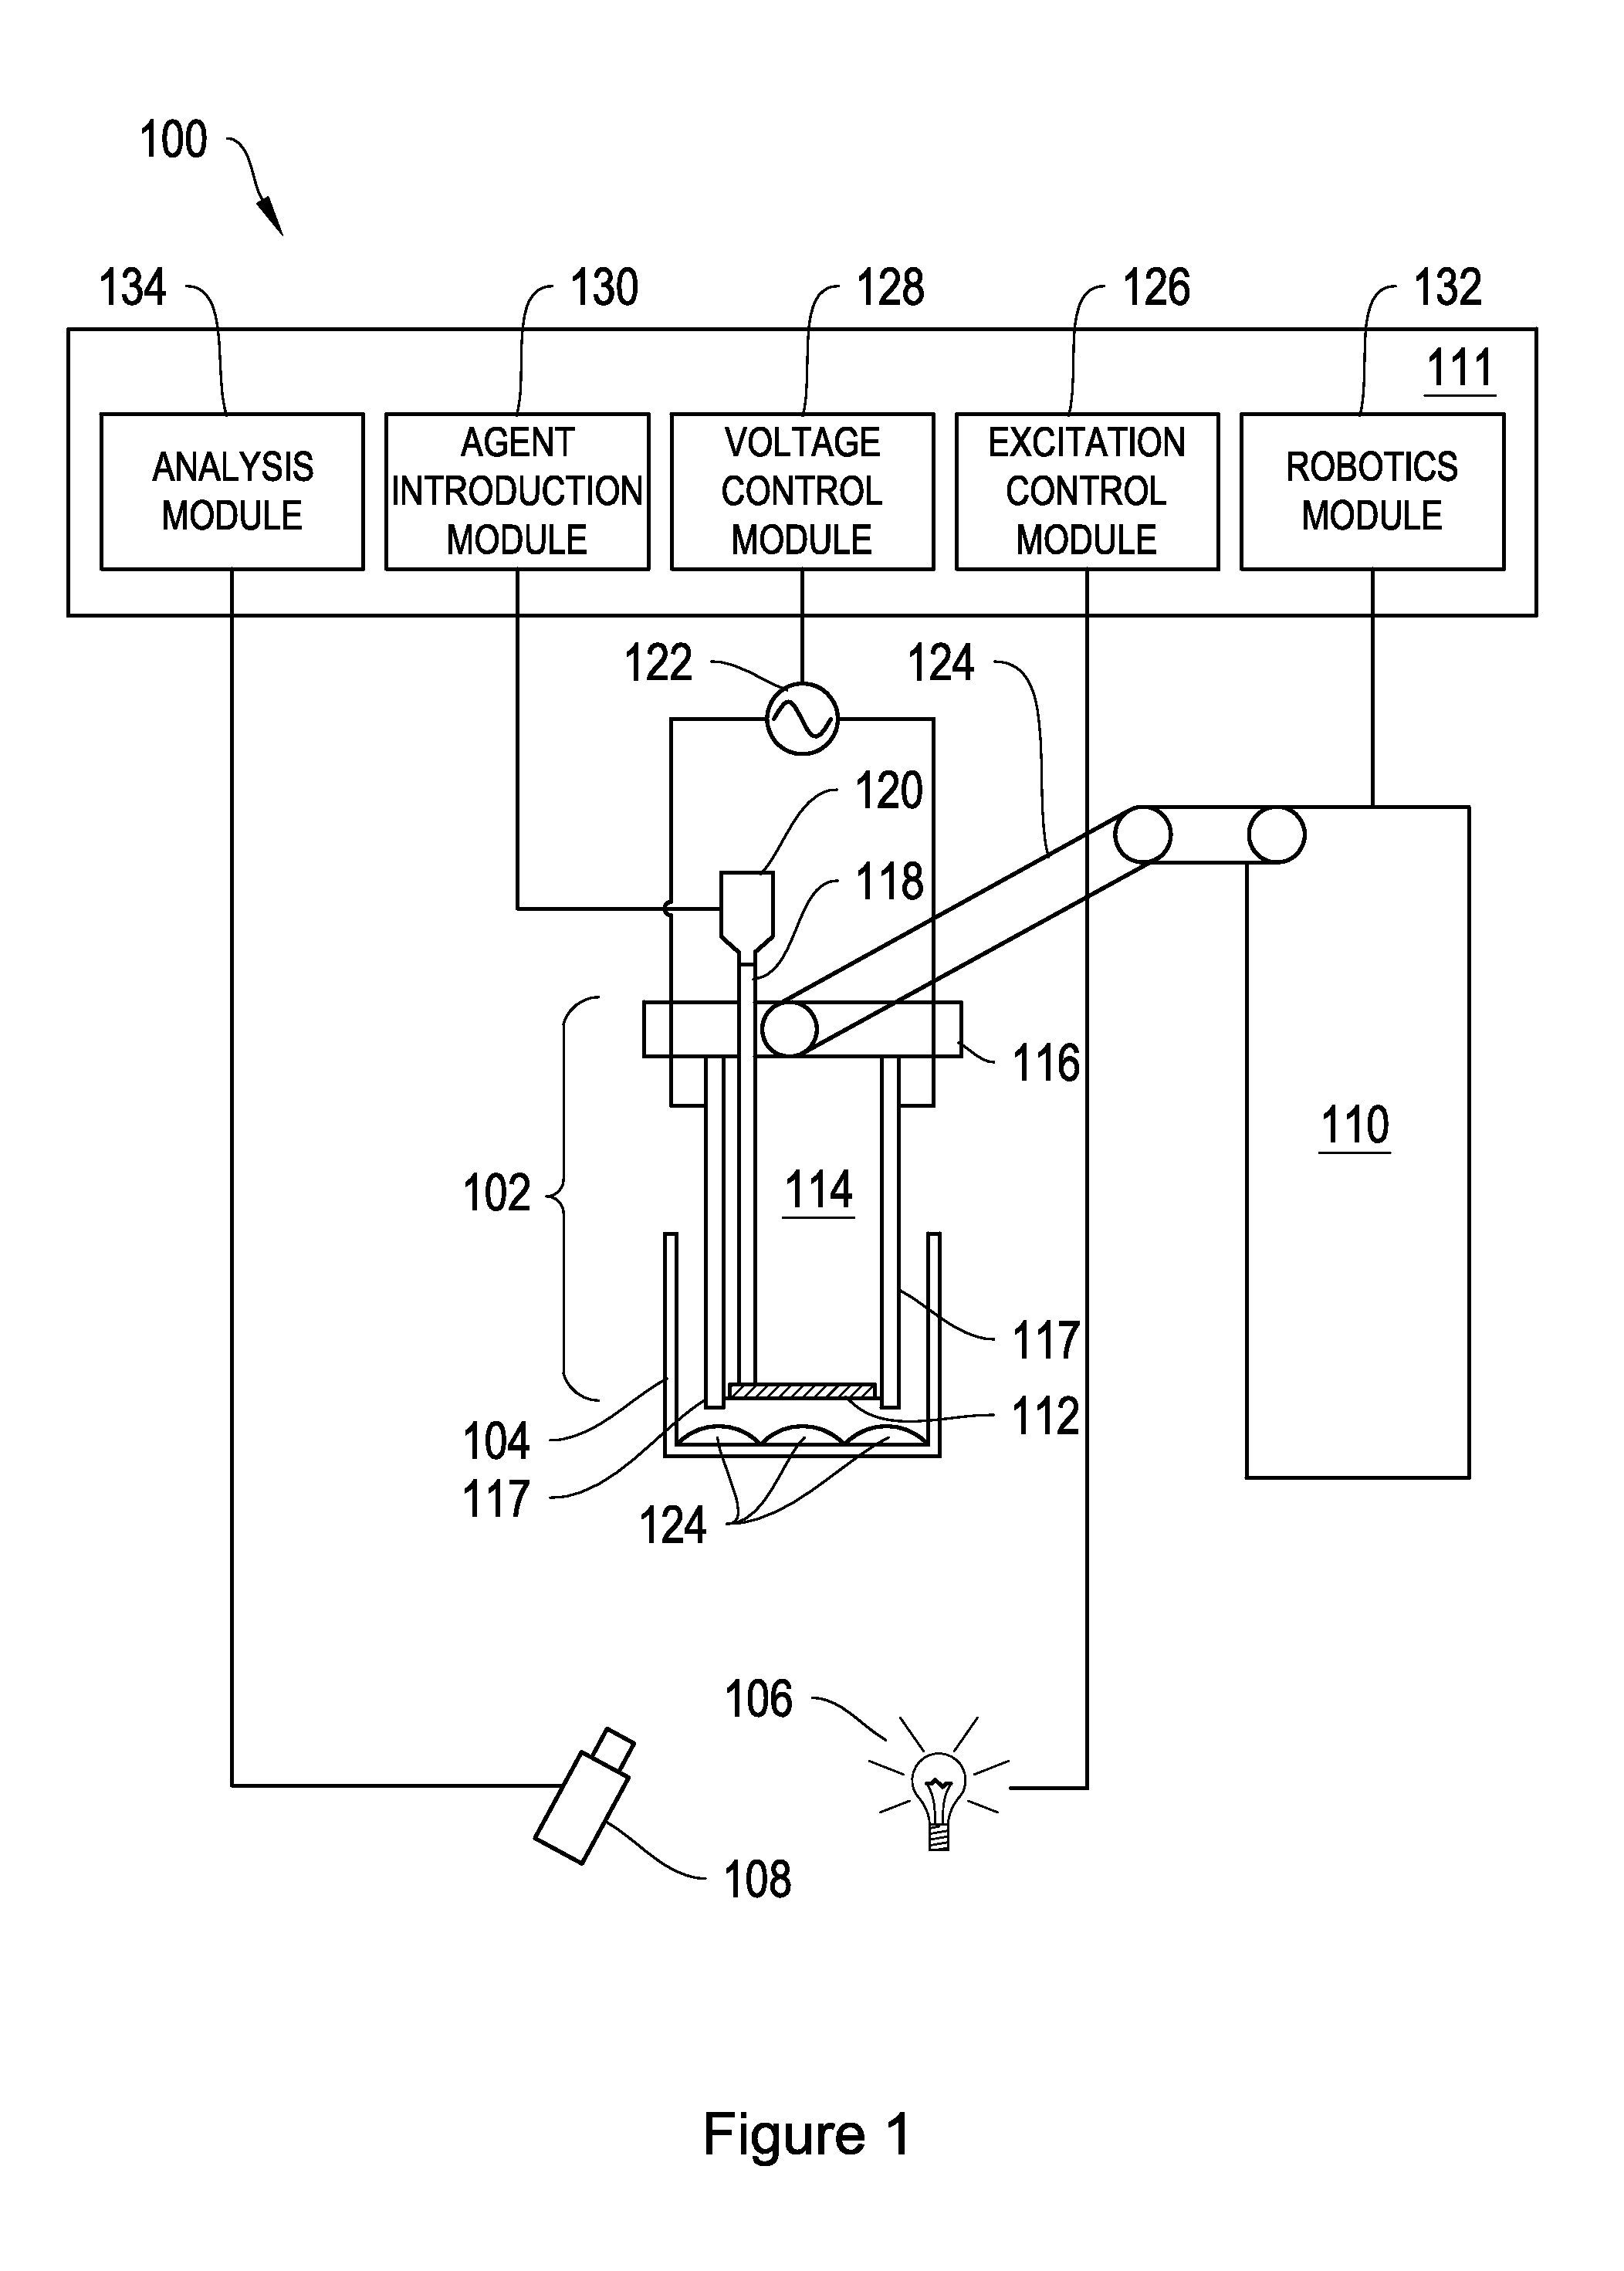 Systems and methods of voltage-gated ion channel assays